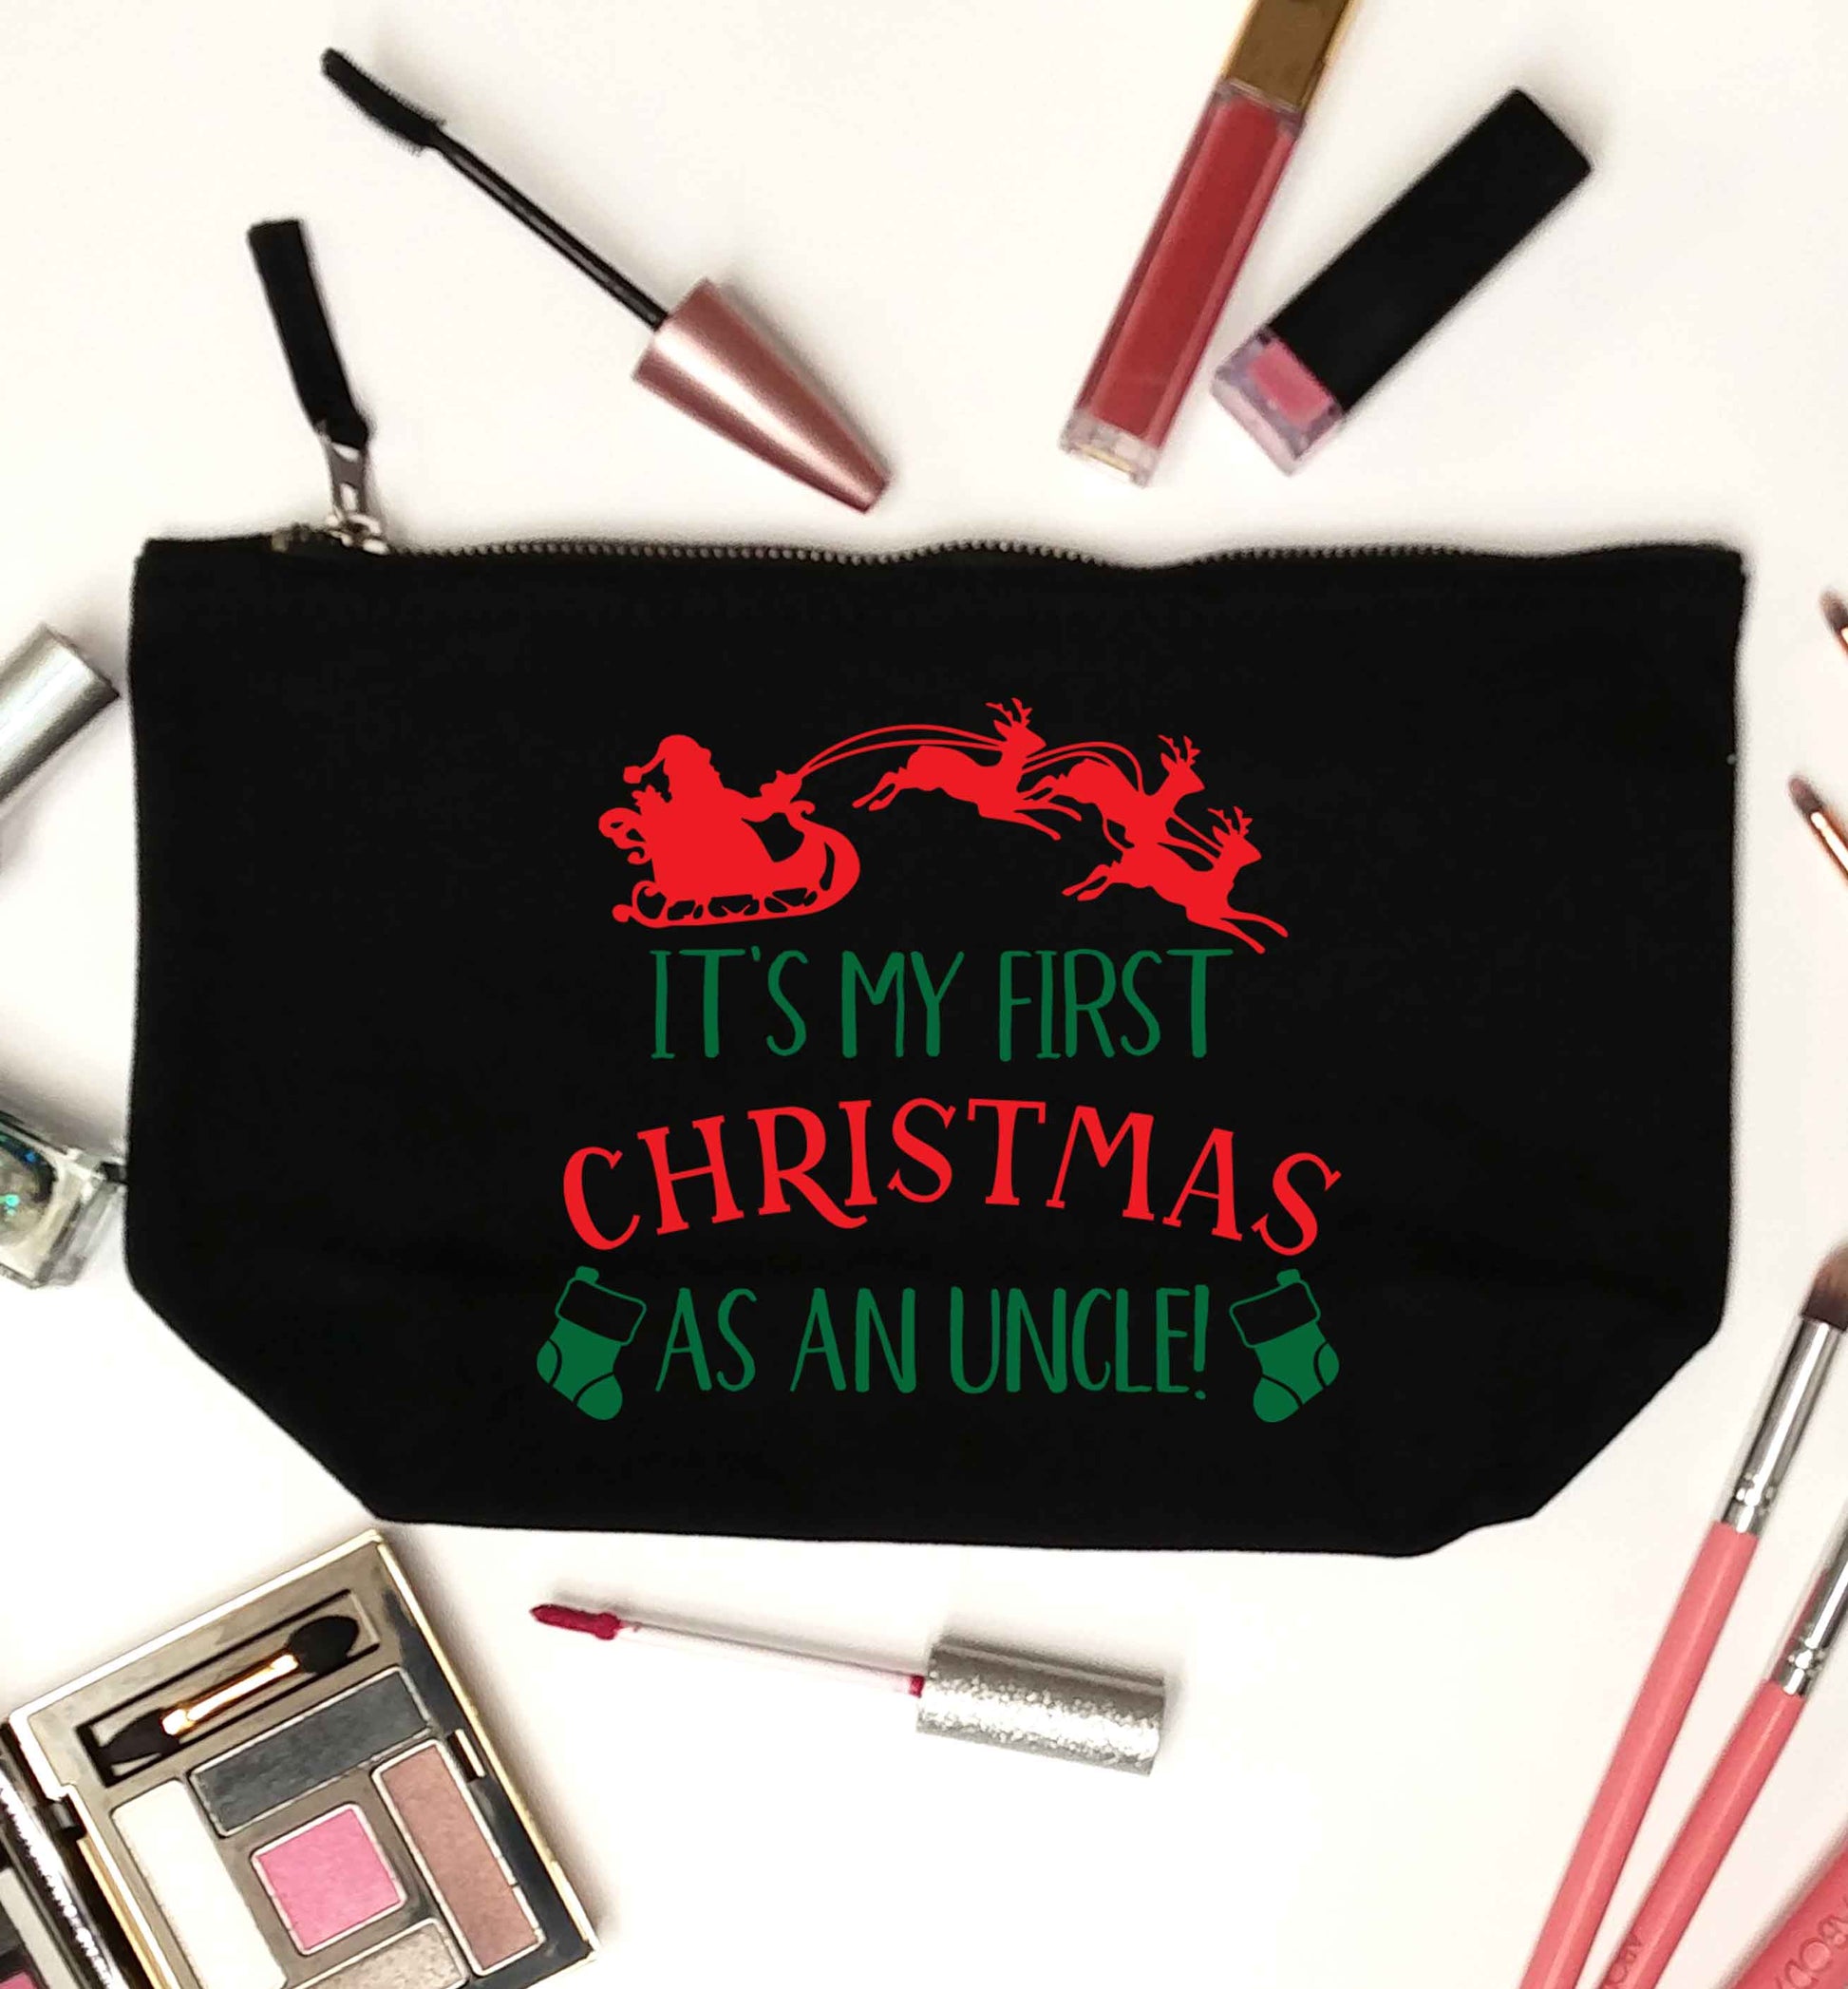 It's my first Christmas as an uncle! black makeup bag